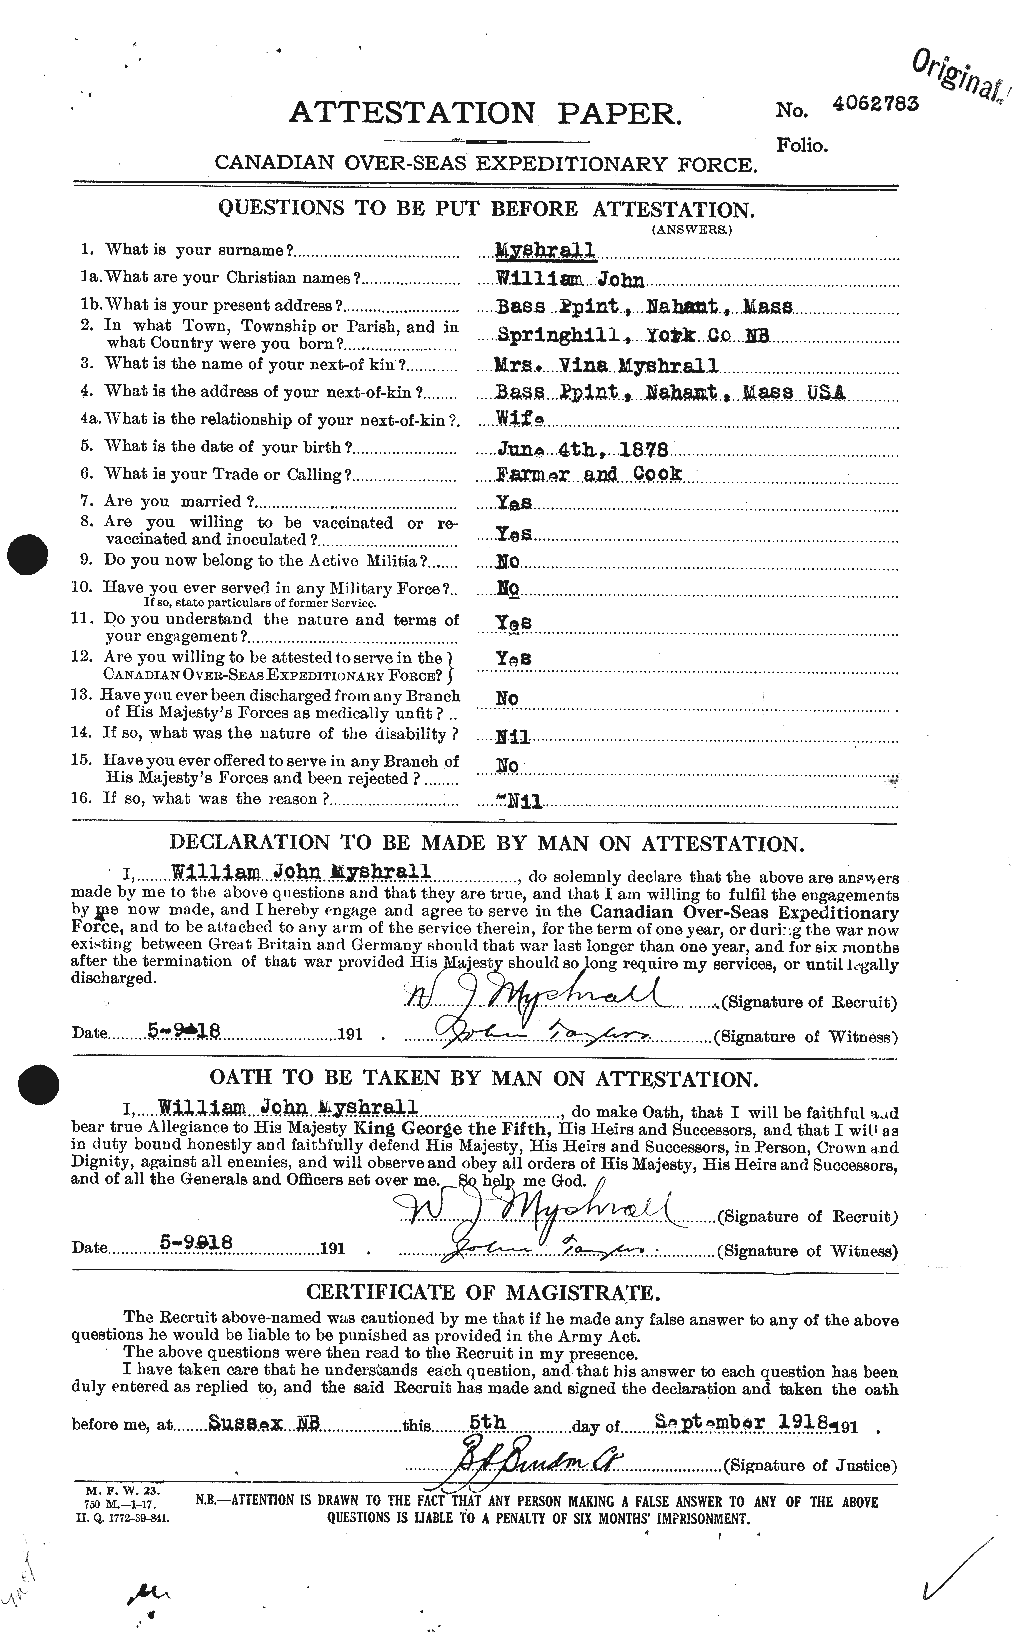 Personnel Records of the First World War - CEF 518056a